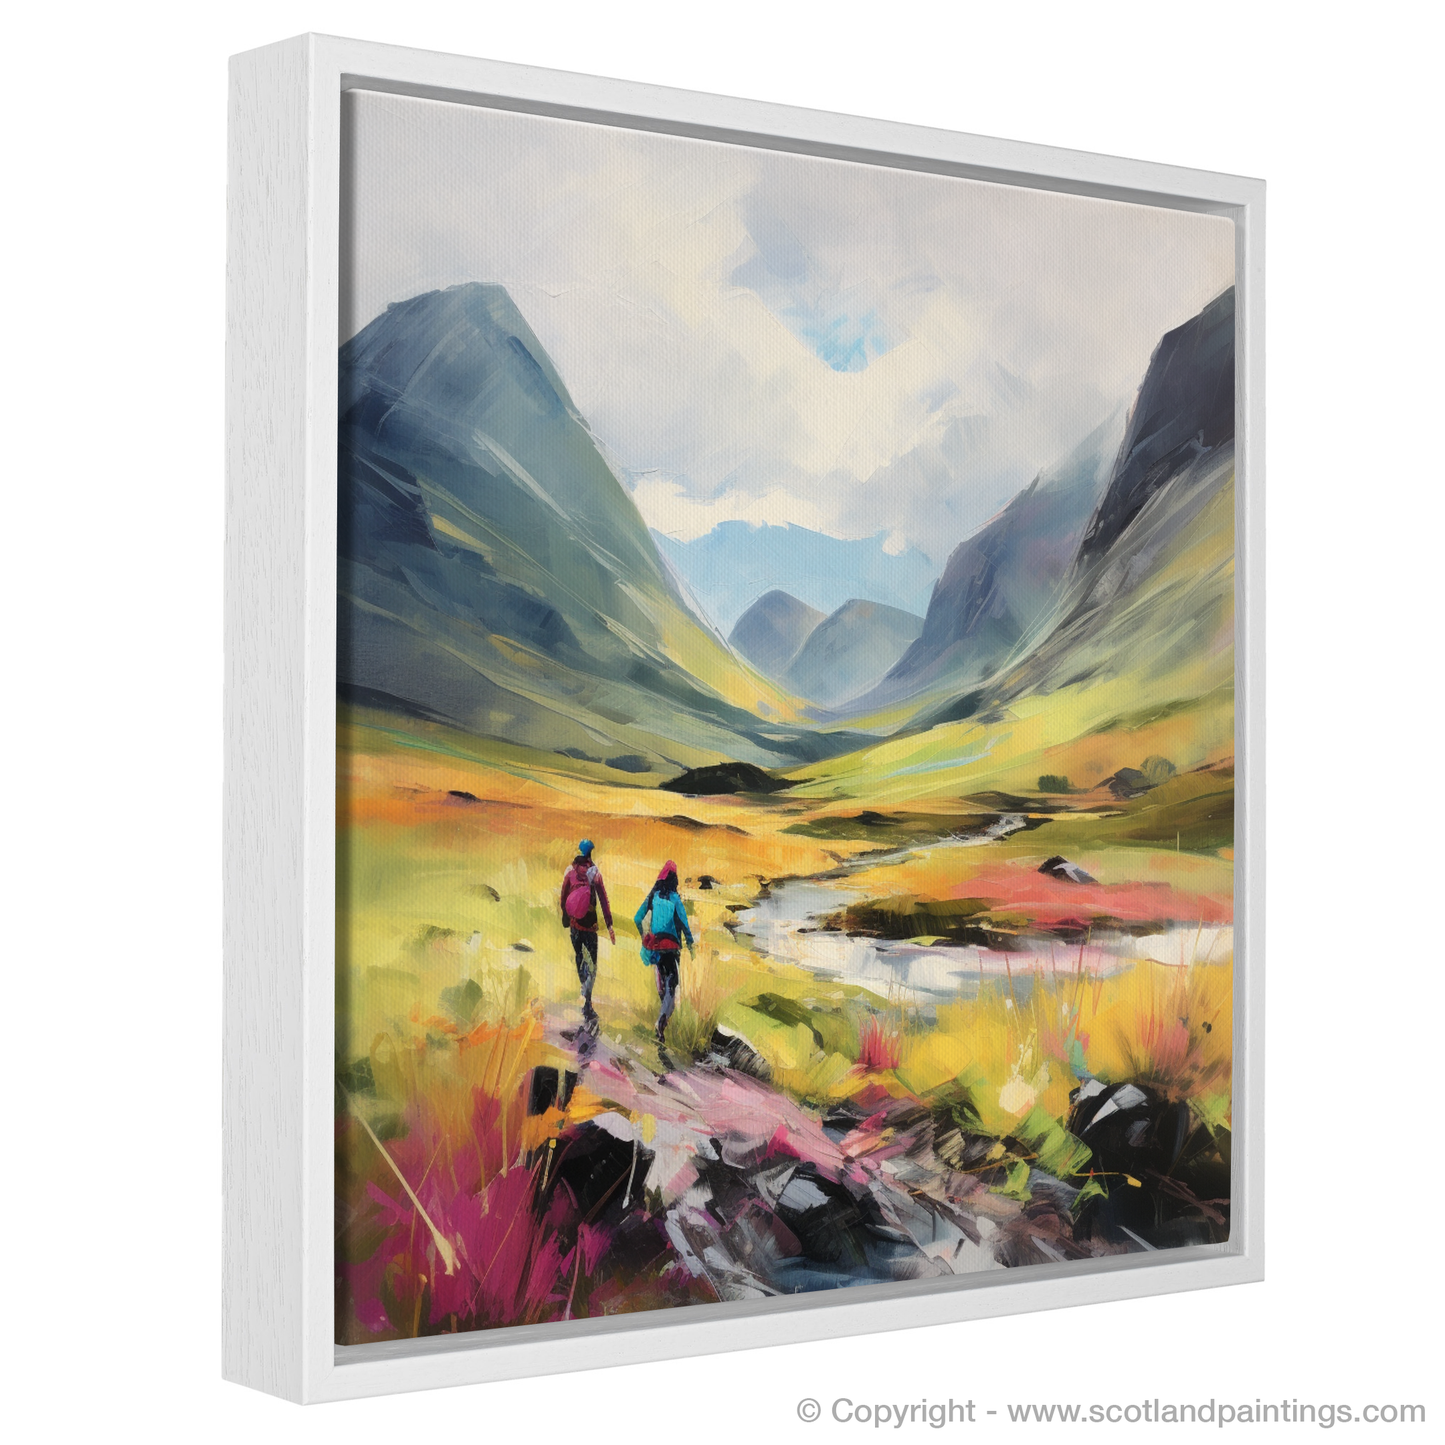 Painting and Art Print of Walkers in Glencoe during summer entitled "Summer Stride in Glencoe Highlands".